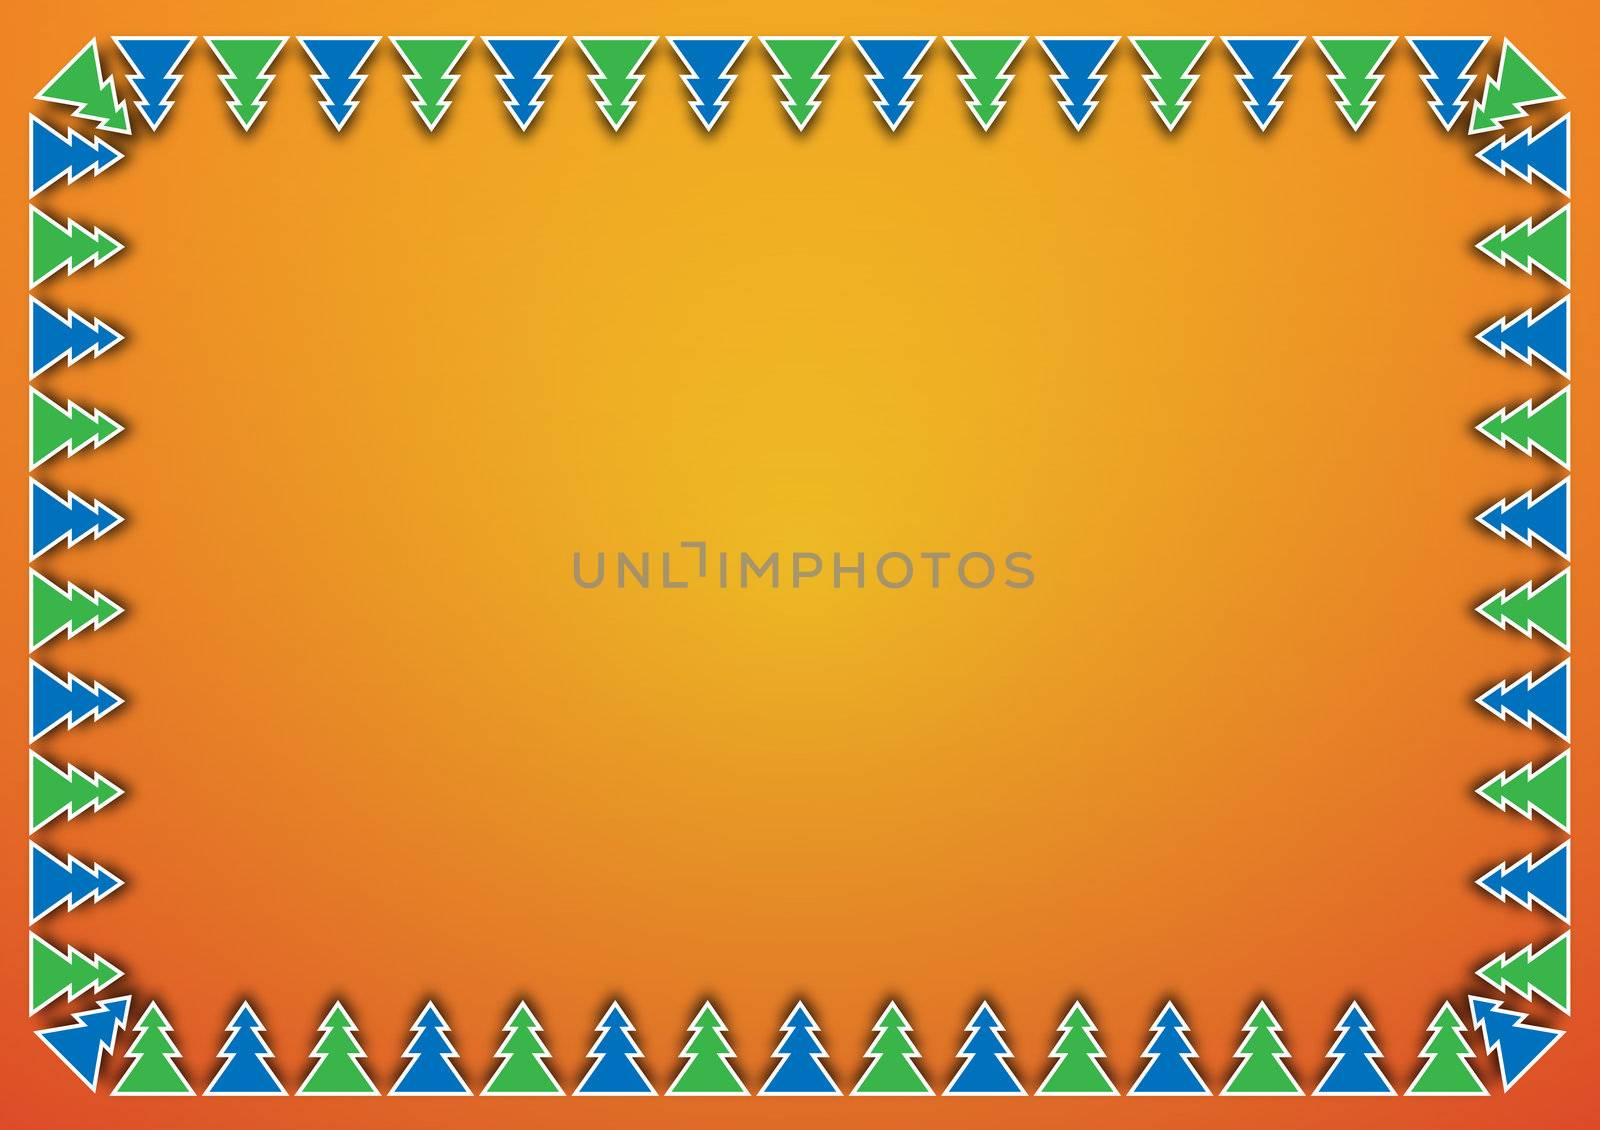 Green and blue Christmas tree on orange background